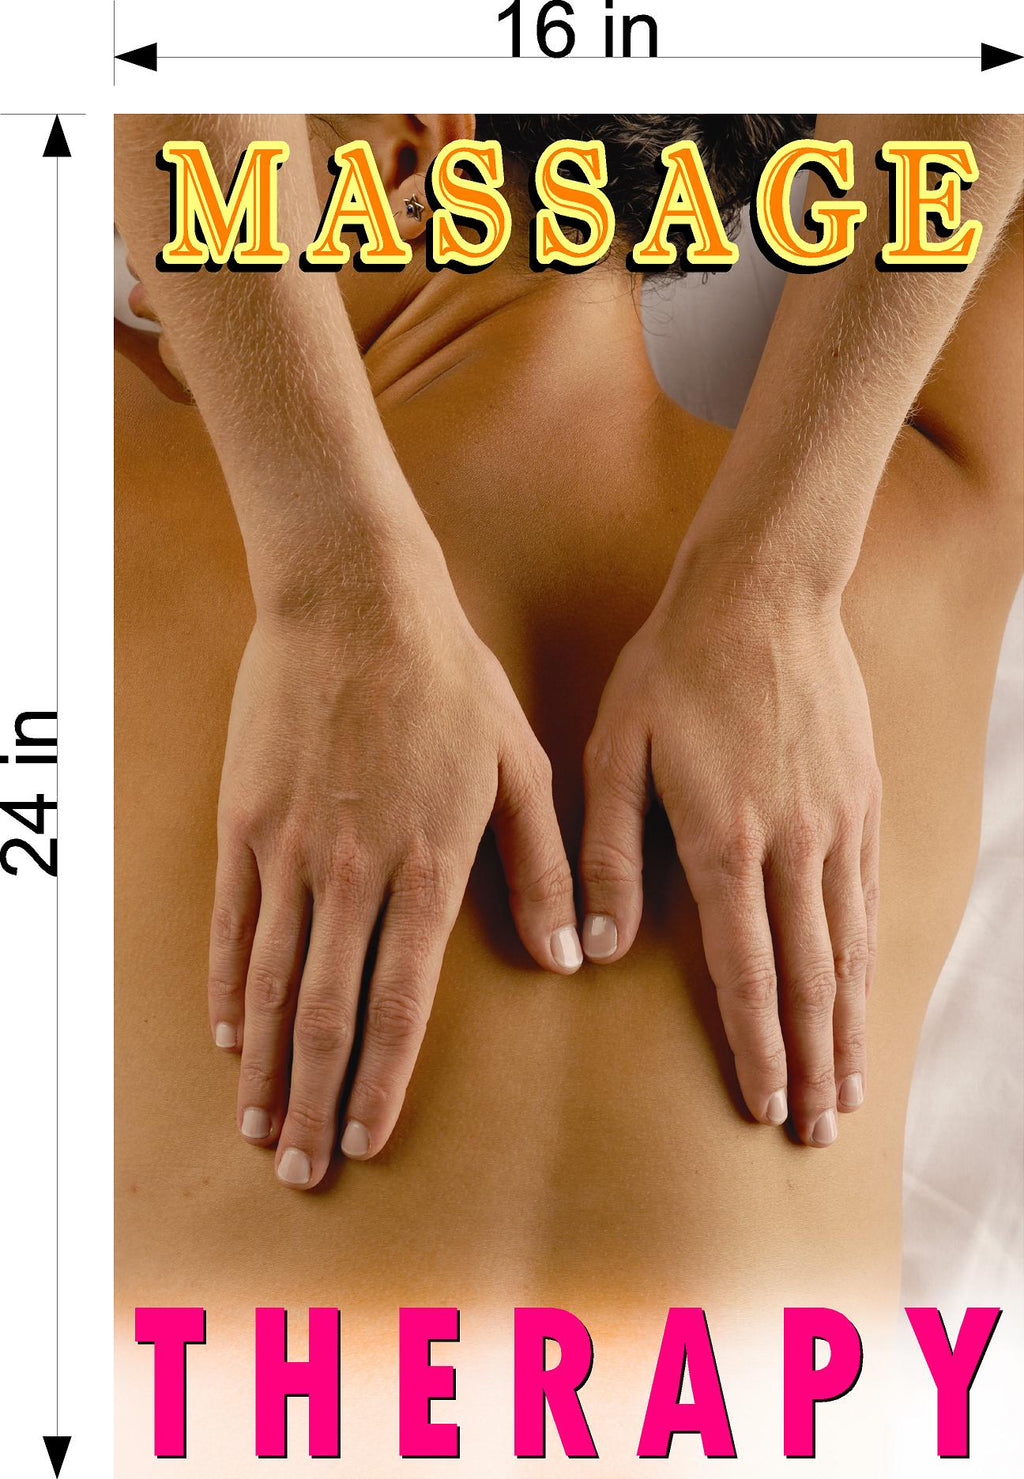 Massage 07 Photo-Realistic Paper Poster Interior Inside Wall Window Non-Laminated Sign Back Body Vertical